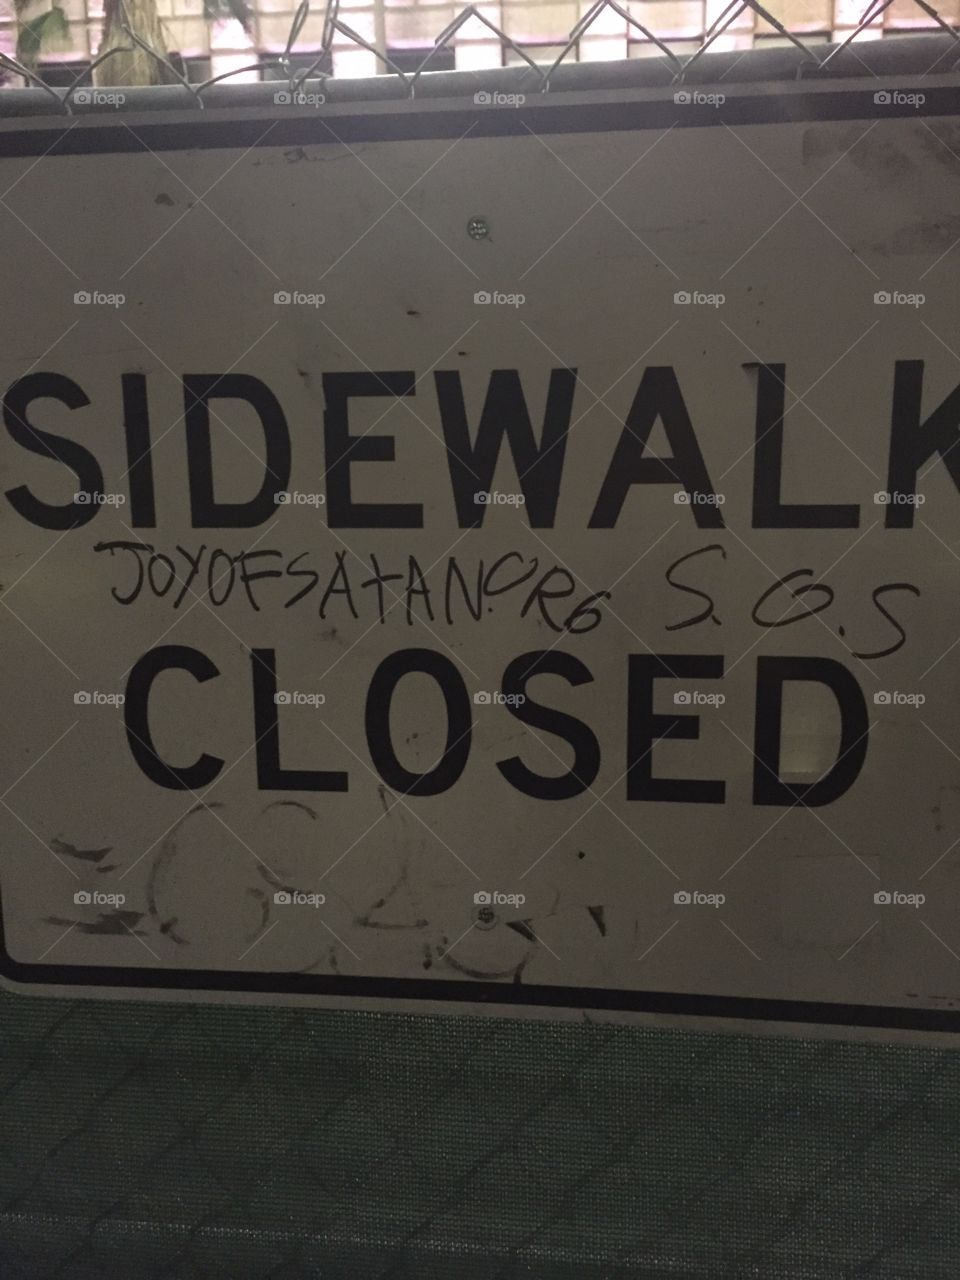 Urban Renewal. A new retail project in Downtown LA has closed the sidewalk.  I watched a tagger walk by and write on the sign!!